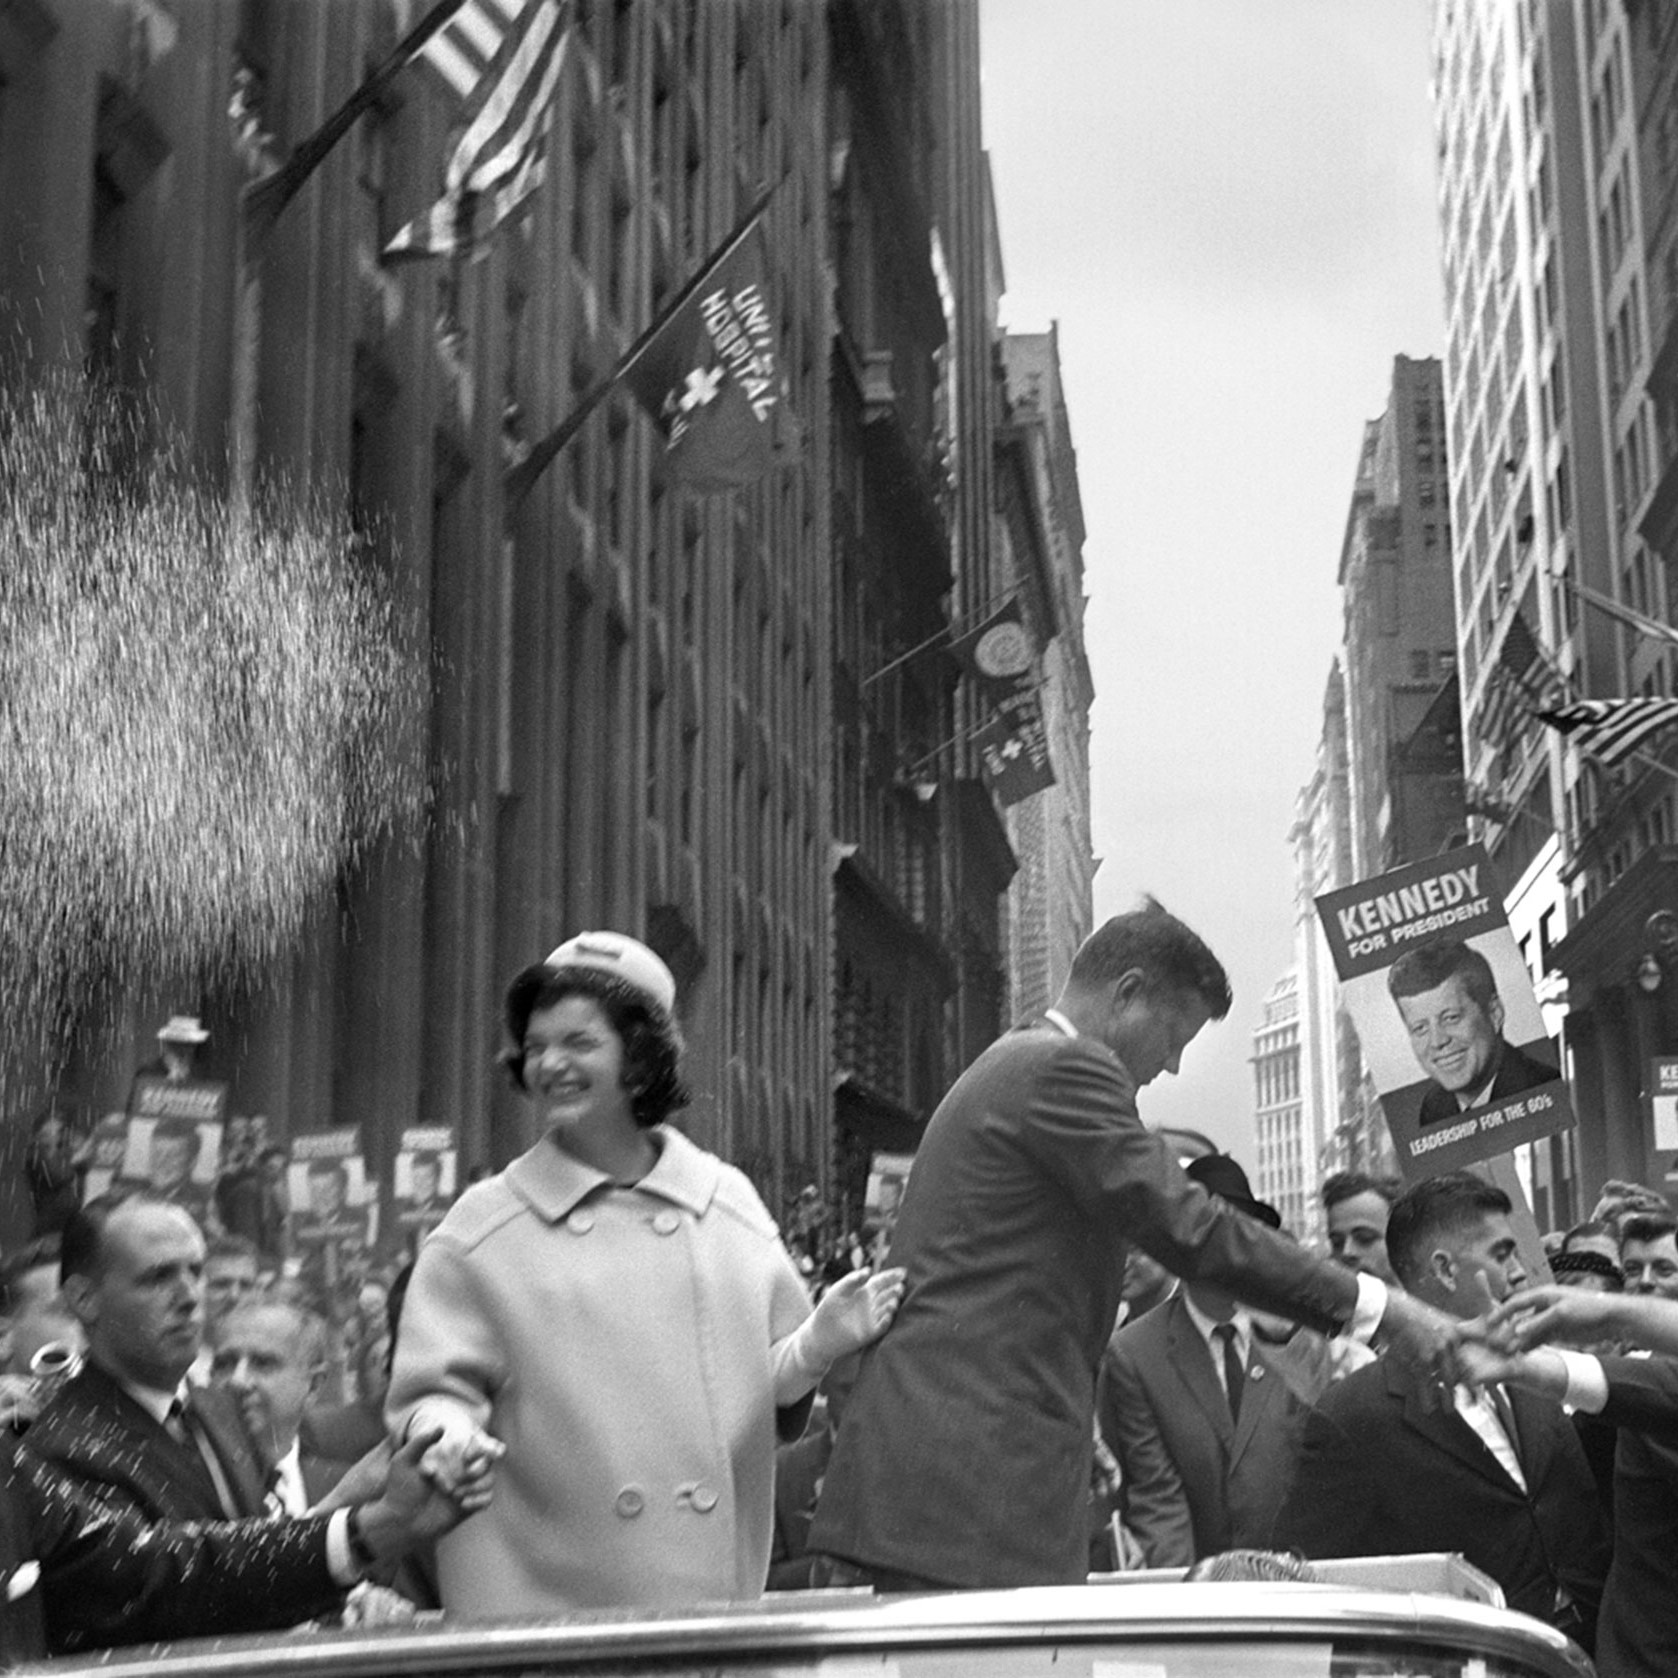 Jacqueline and John F. Kennedy on an NYC street, 1960; photograph by Cornell Capa